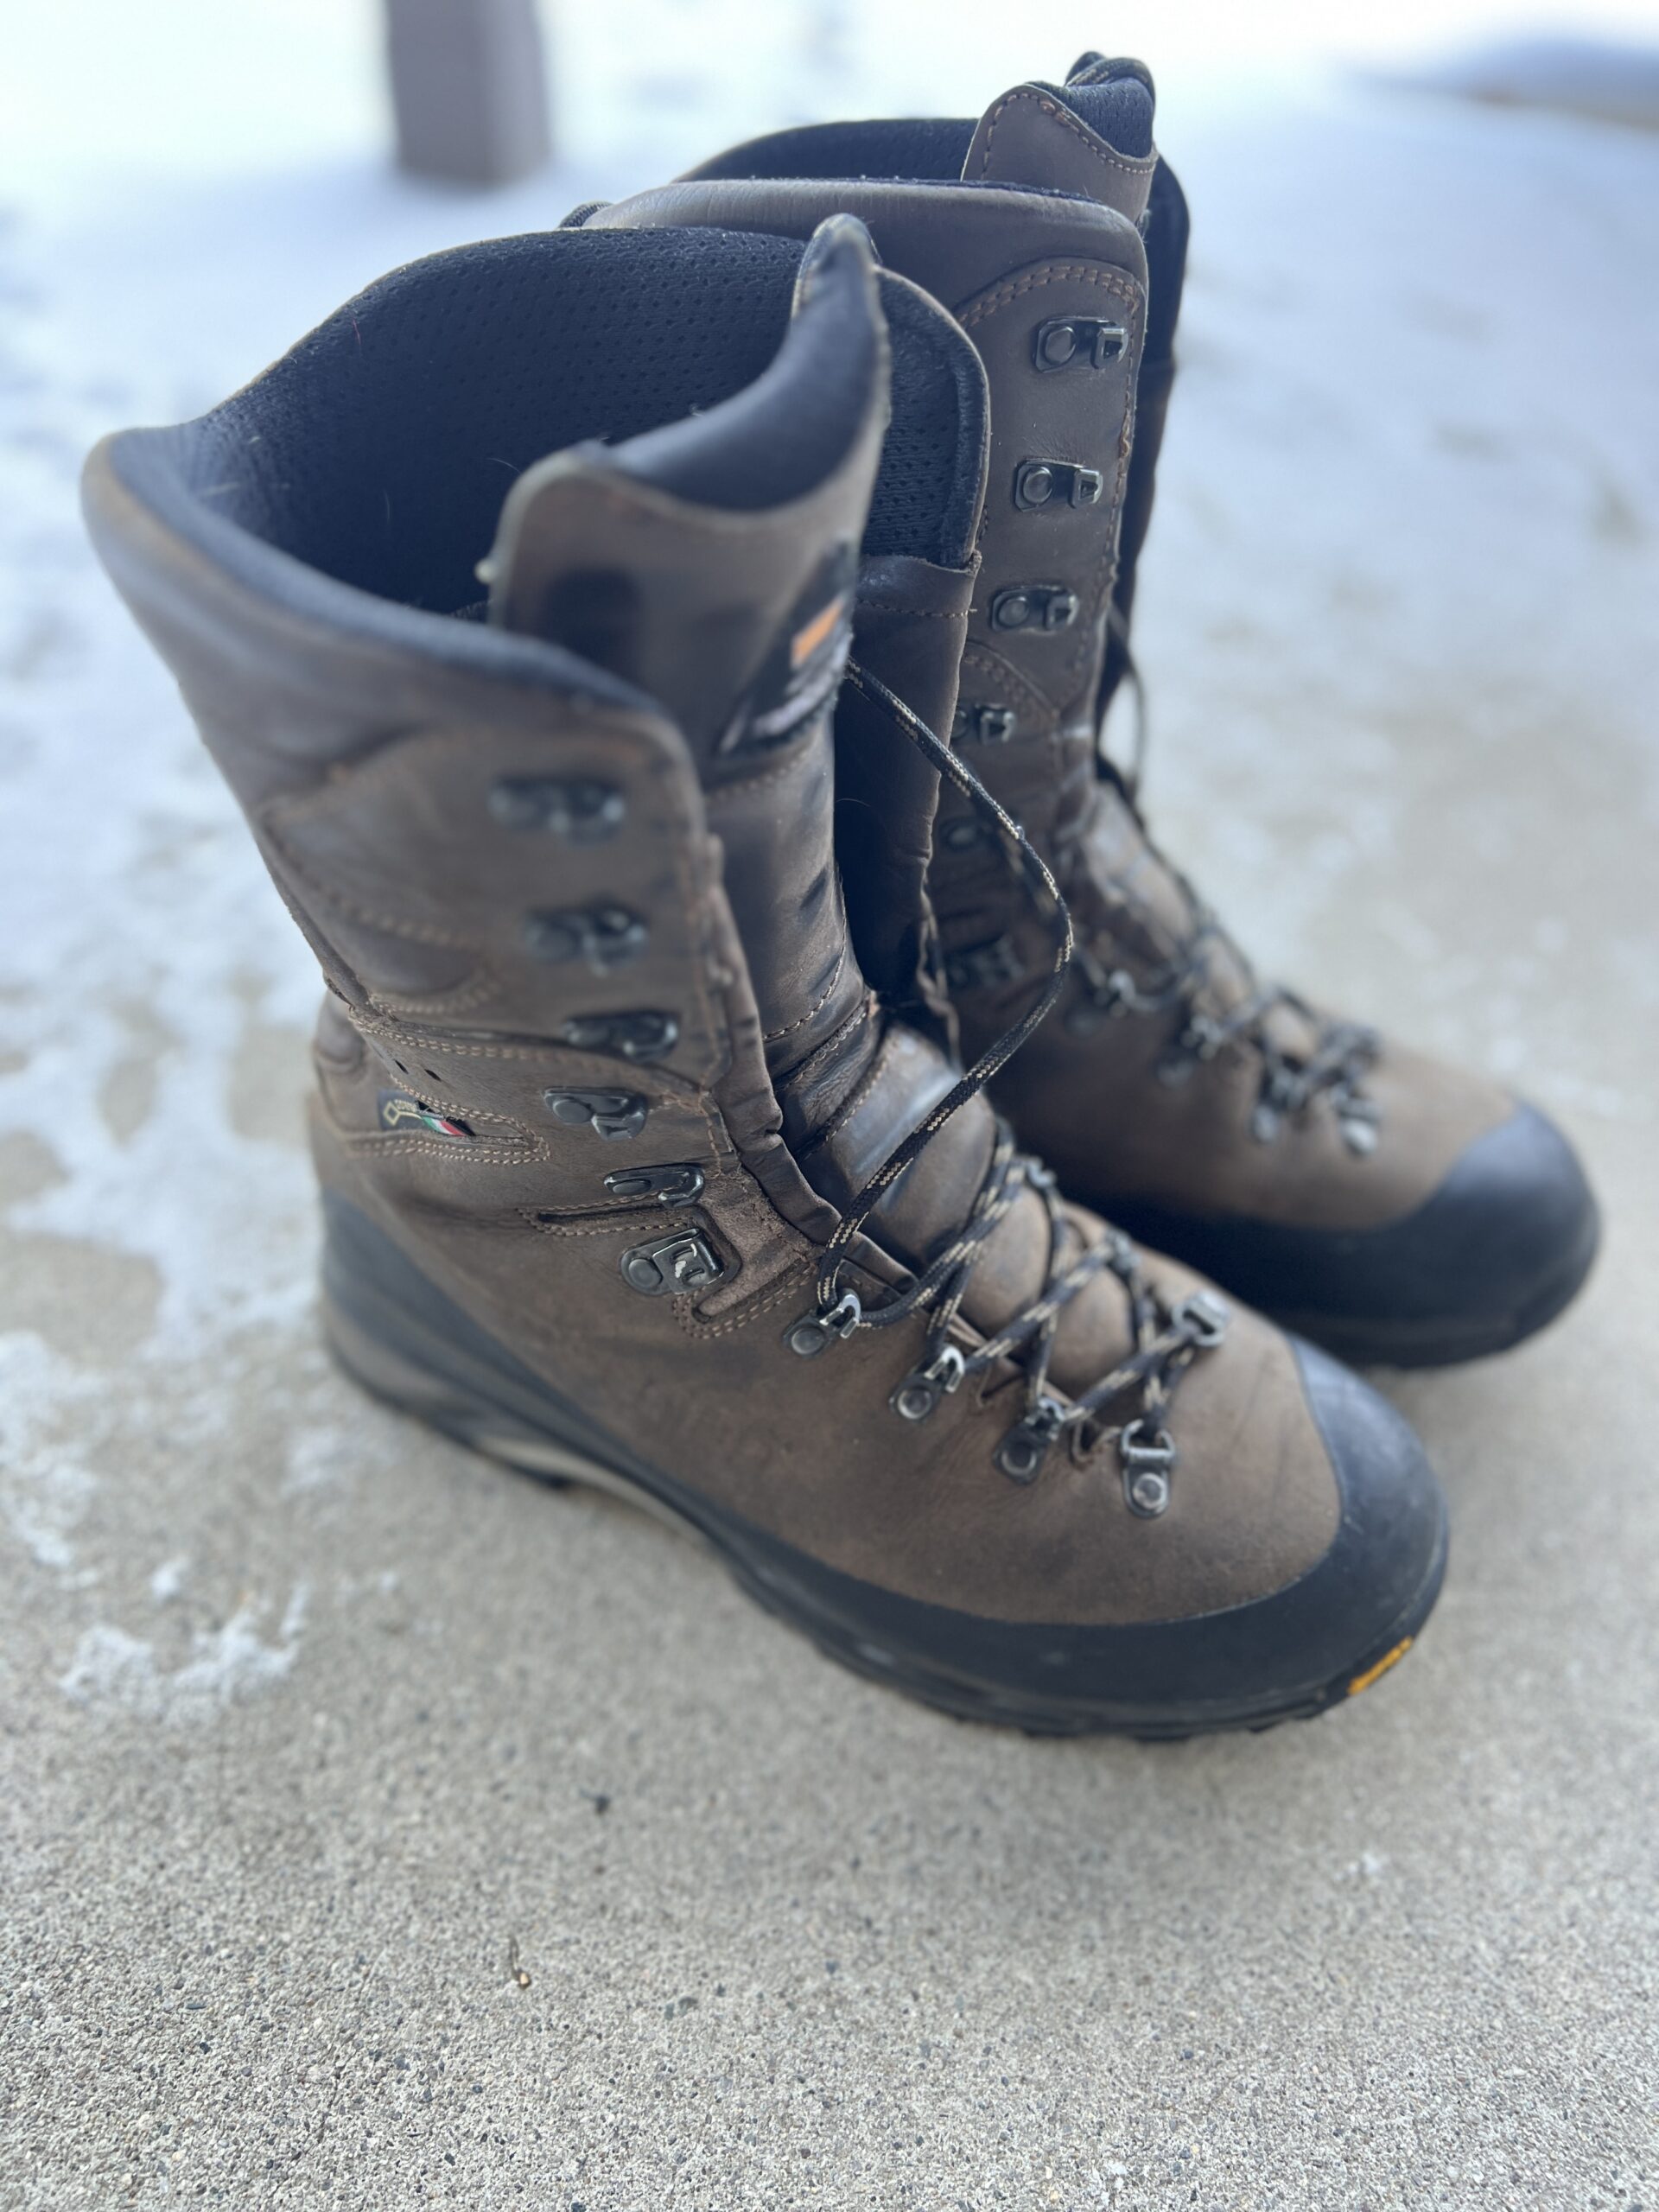 Zamberlan Boots 980 Outfitter GTX RR Hunting Boots Review